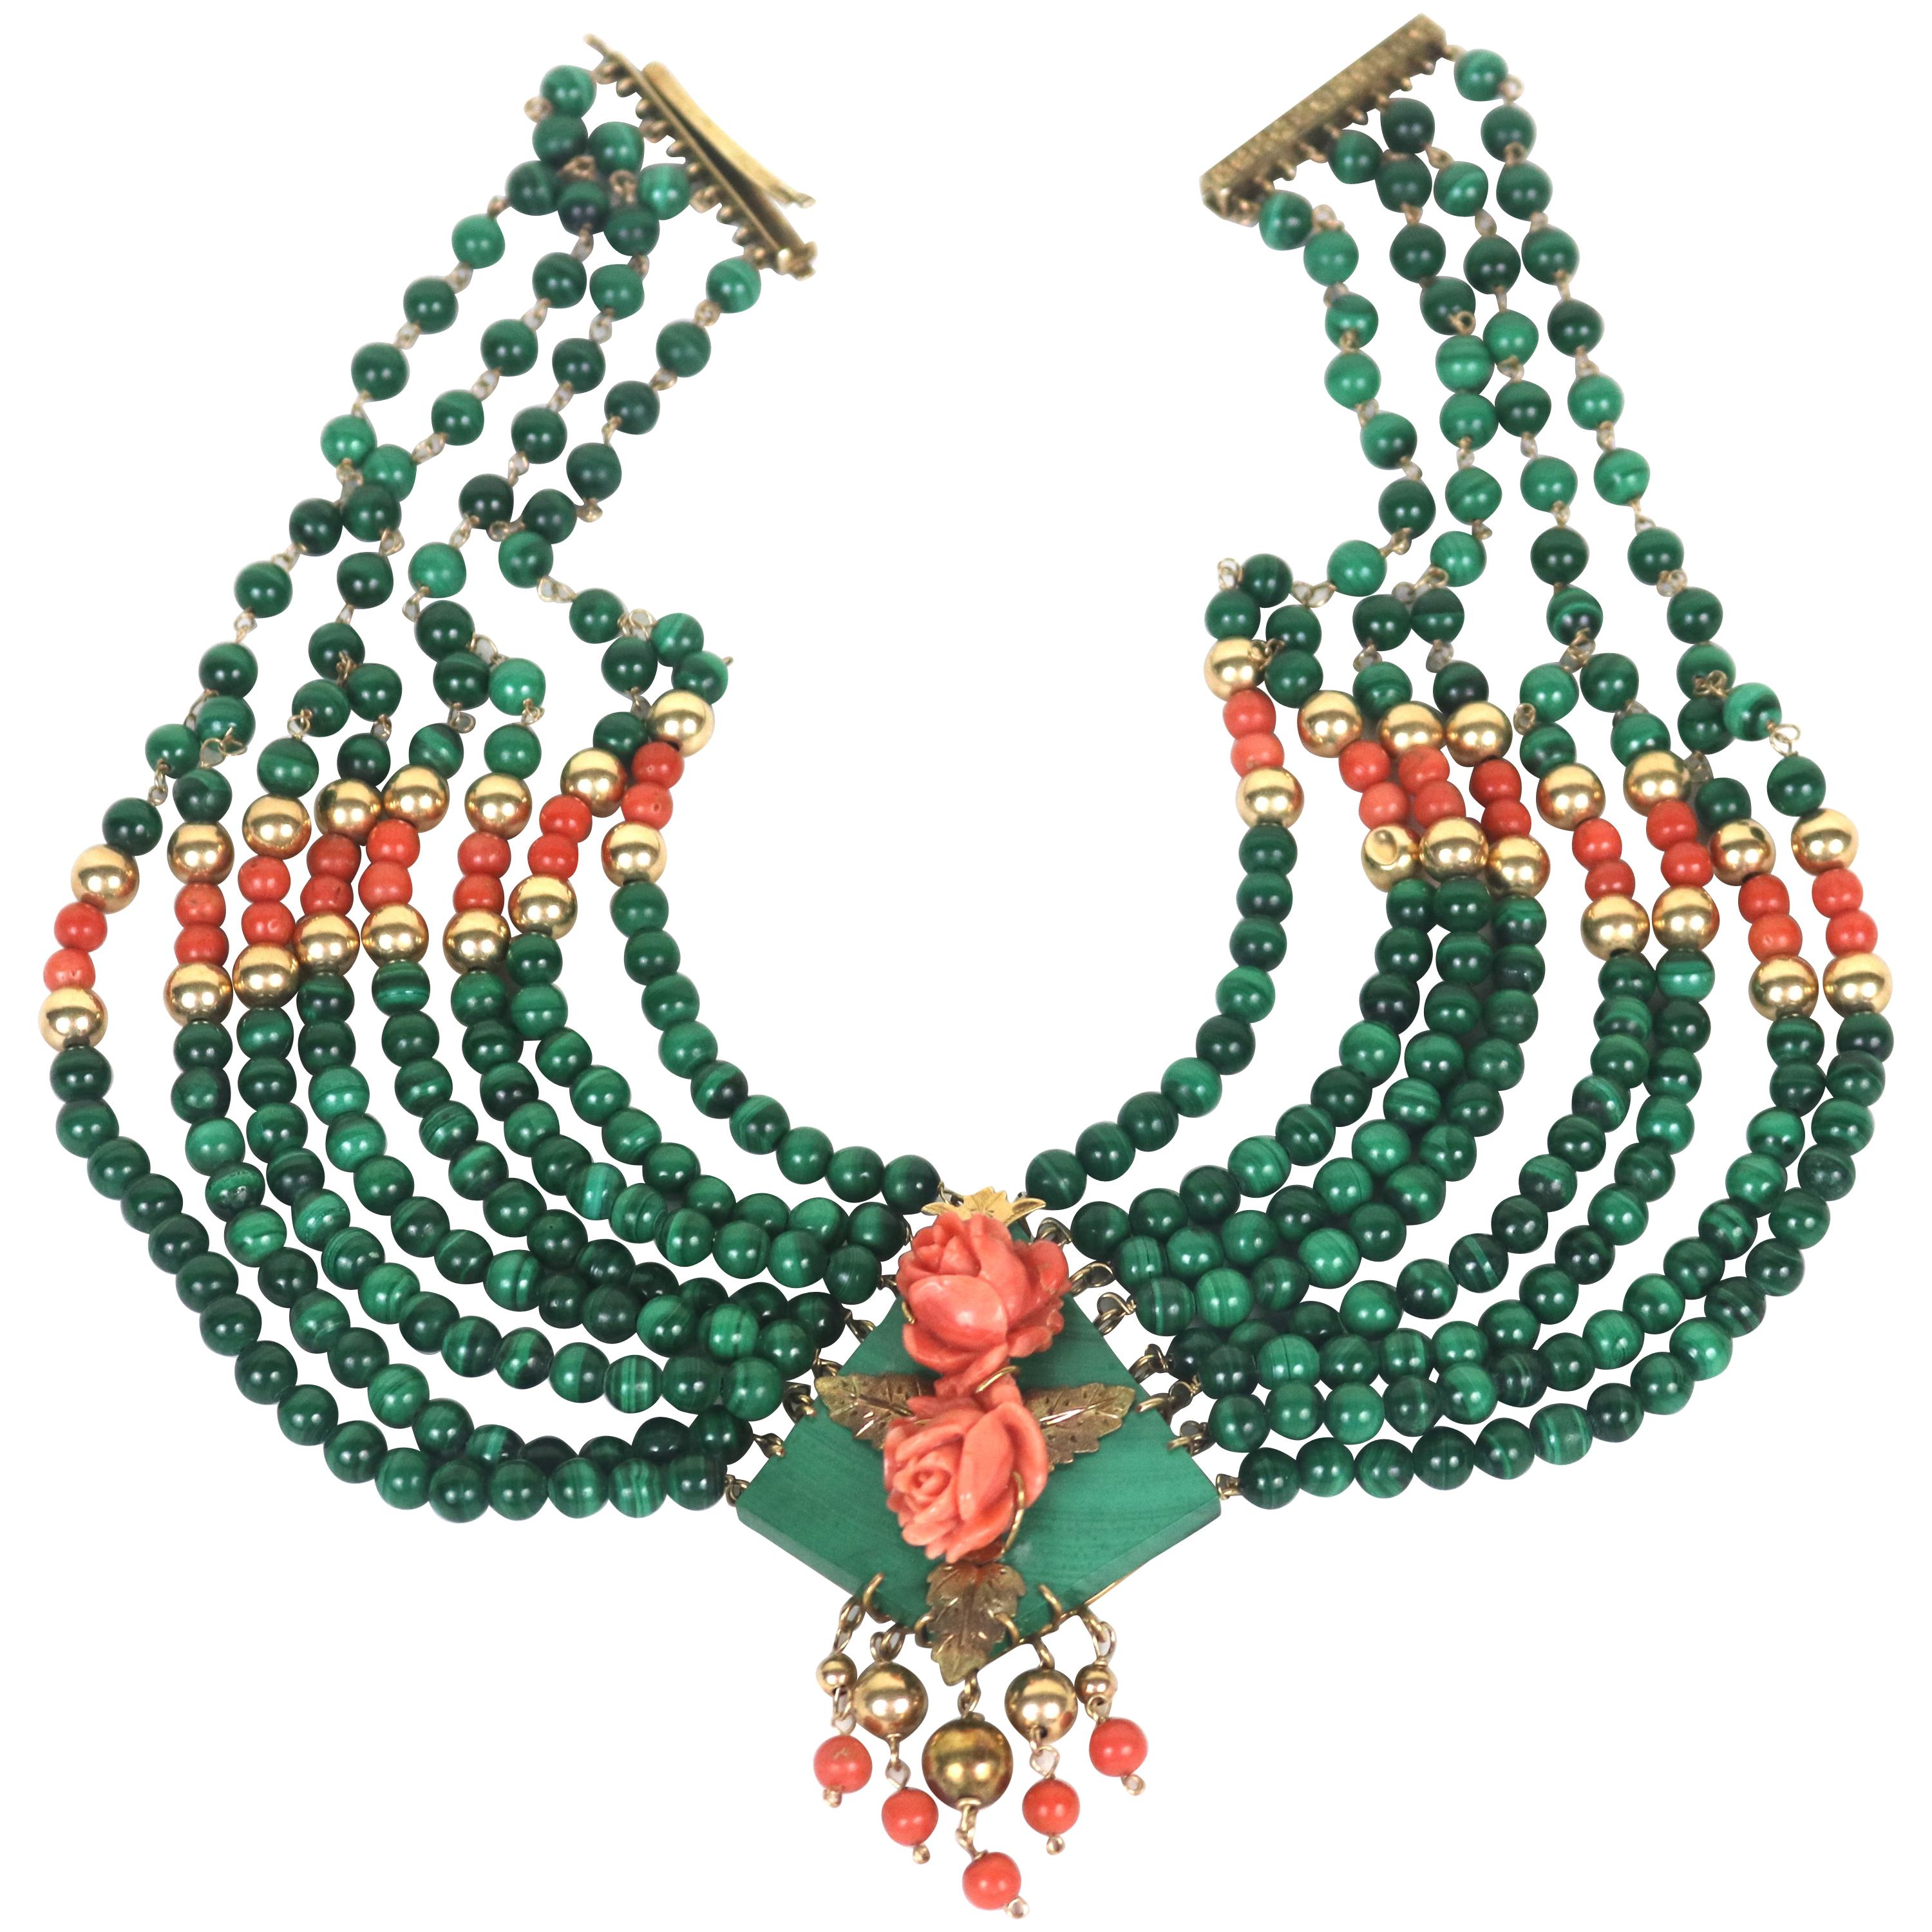 14K Gold Eight Strand Malachite Diamond, Coral Collar Necklace- Stunning For Sale